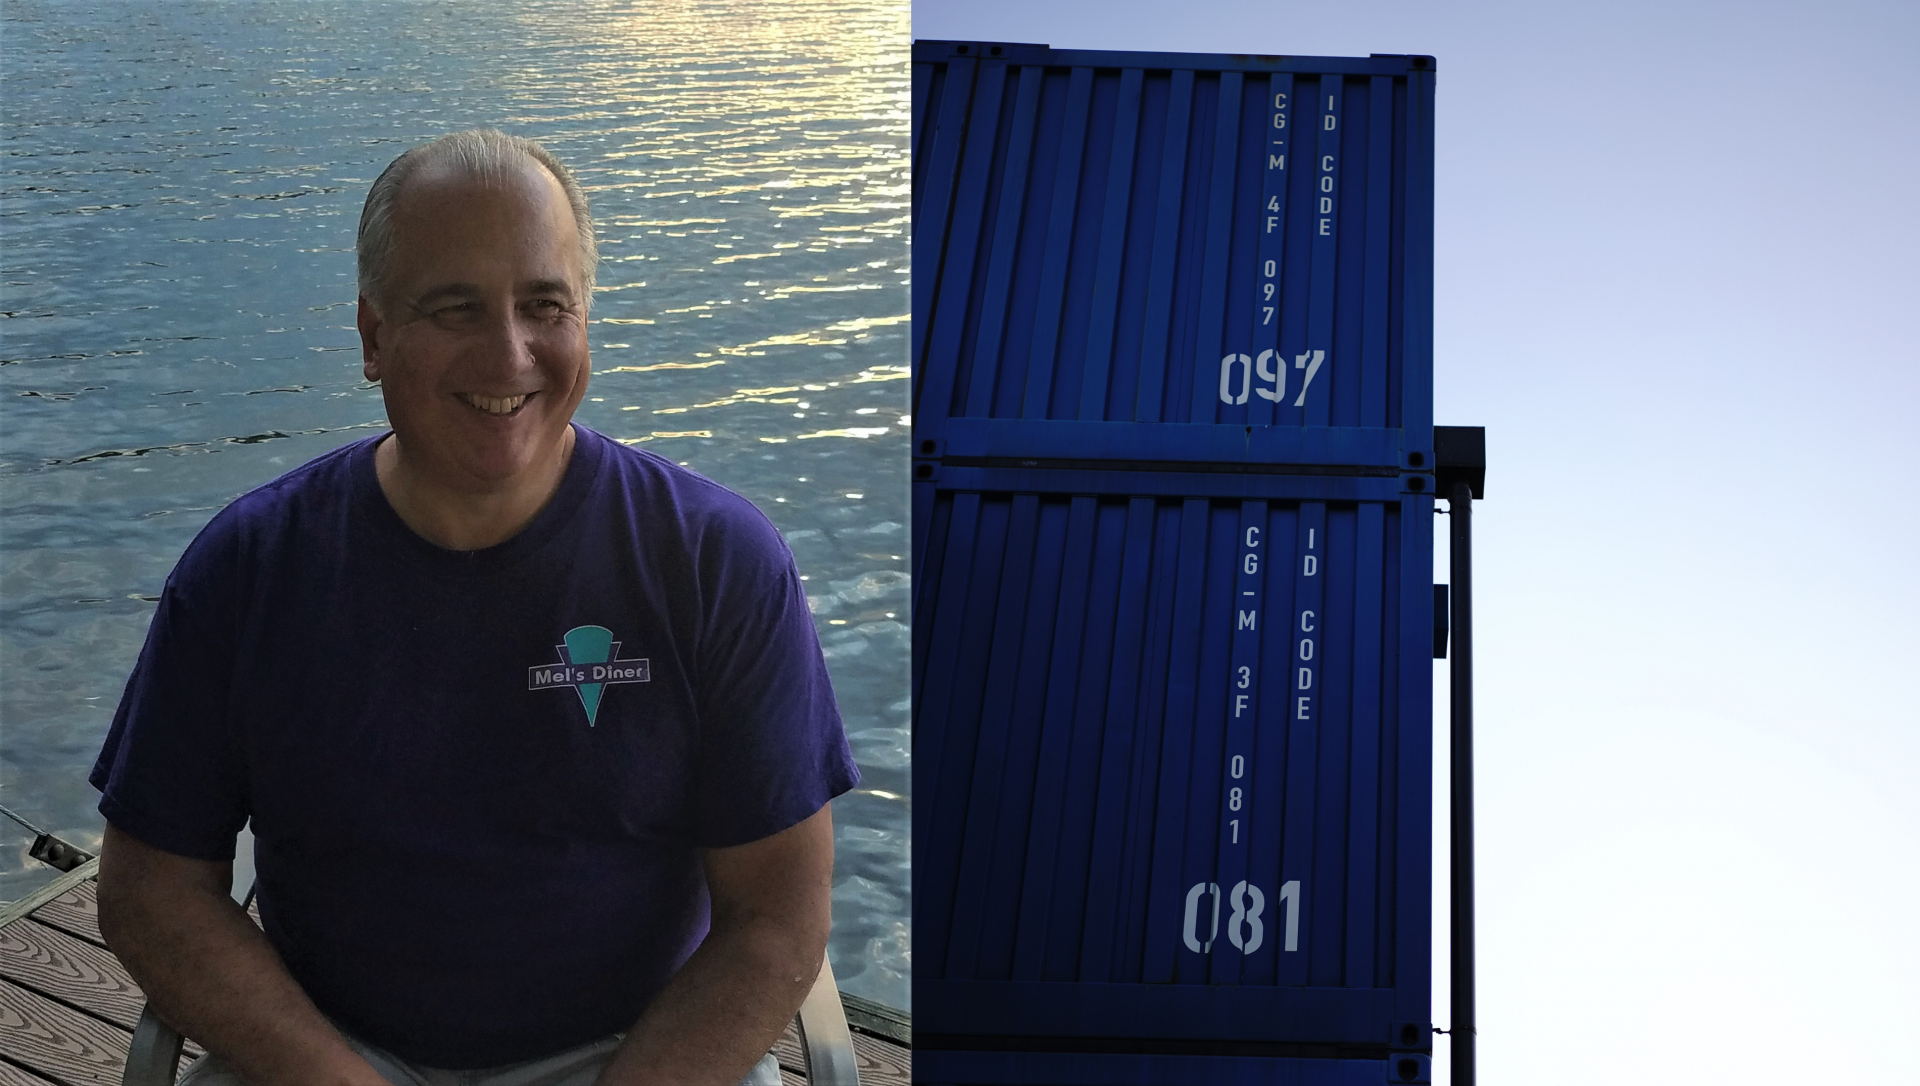 Kevin Polak: The Designer Behind the NuCONTAINER